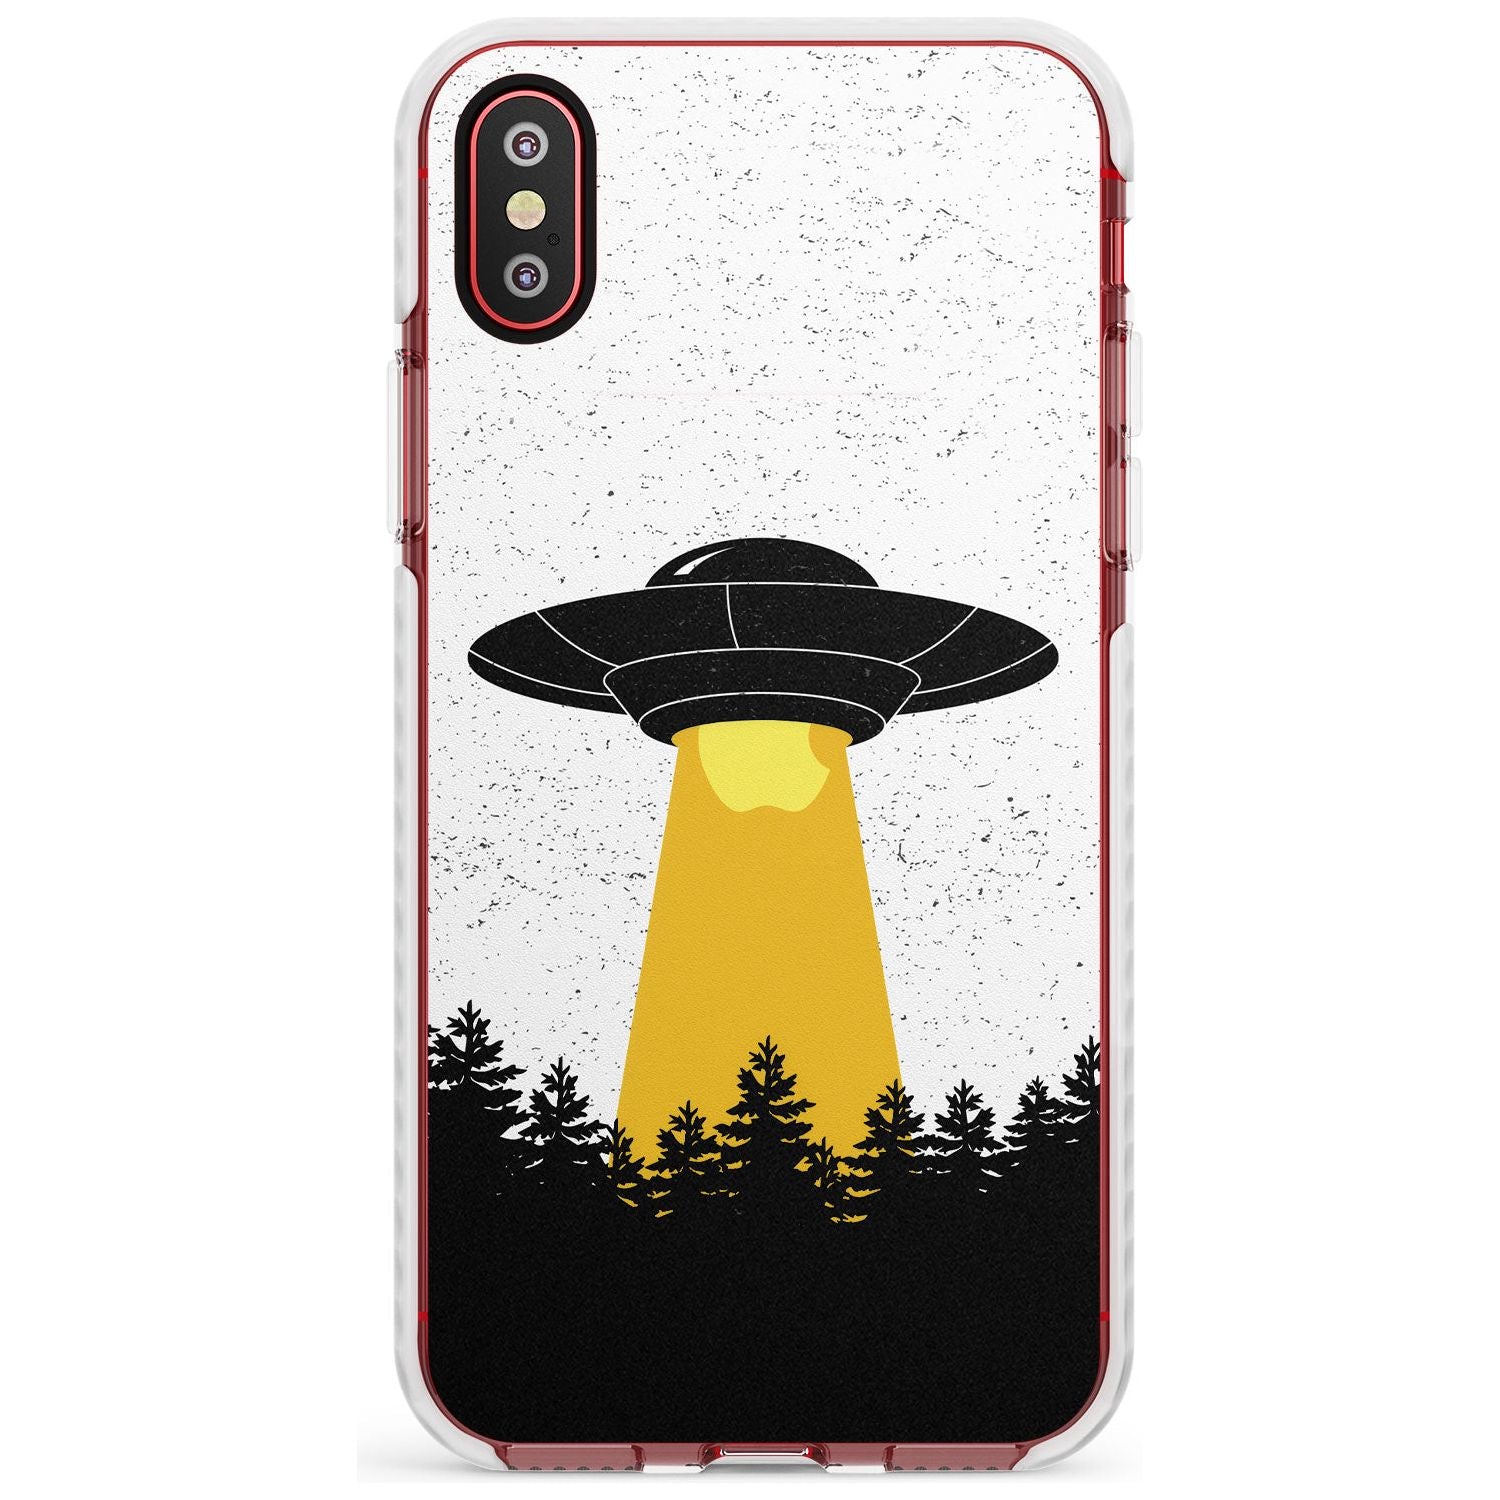 Forest Abduction Impact Phone Case for iPhone X XS Max XR